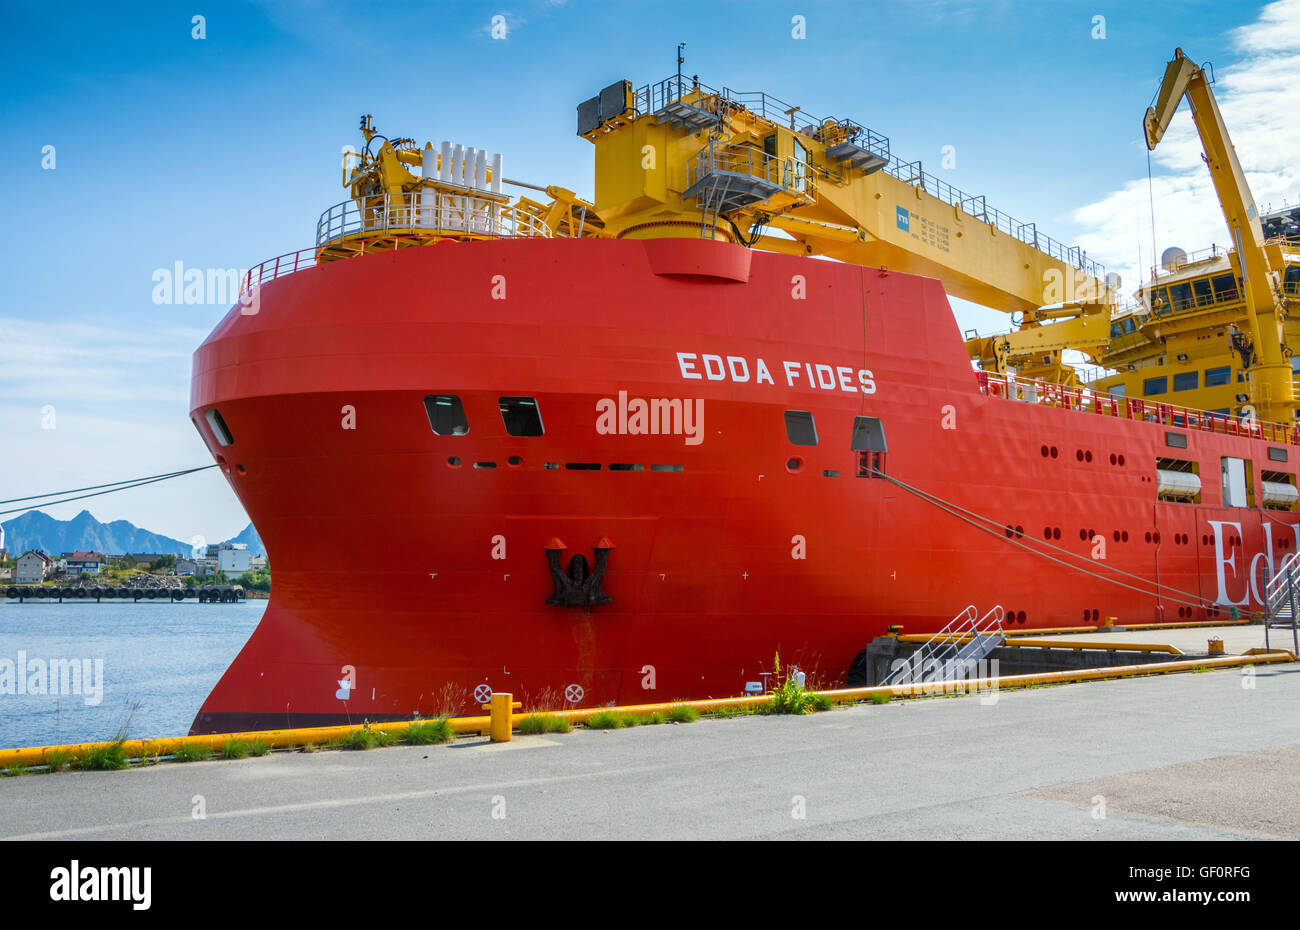 Edda Fides flotel, Accommodation ship for the oil industry, big red ship, Stock Photo